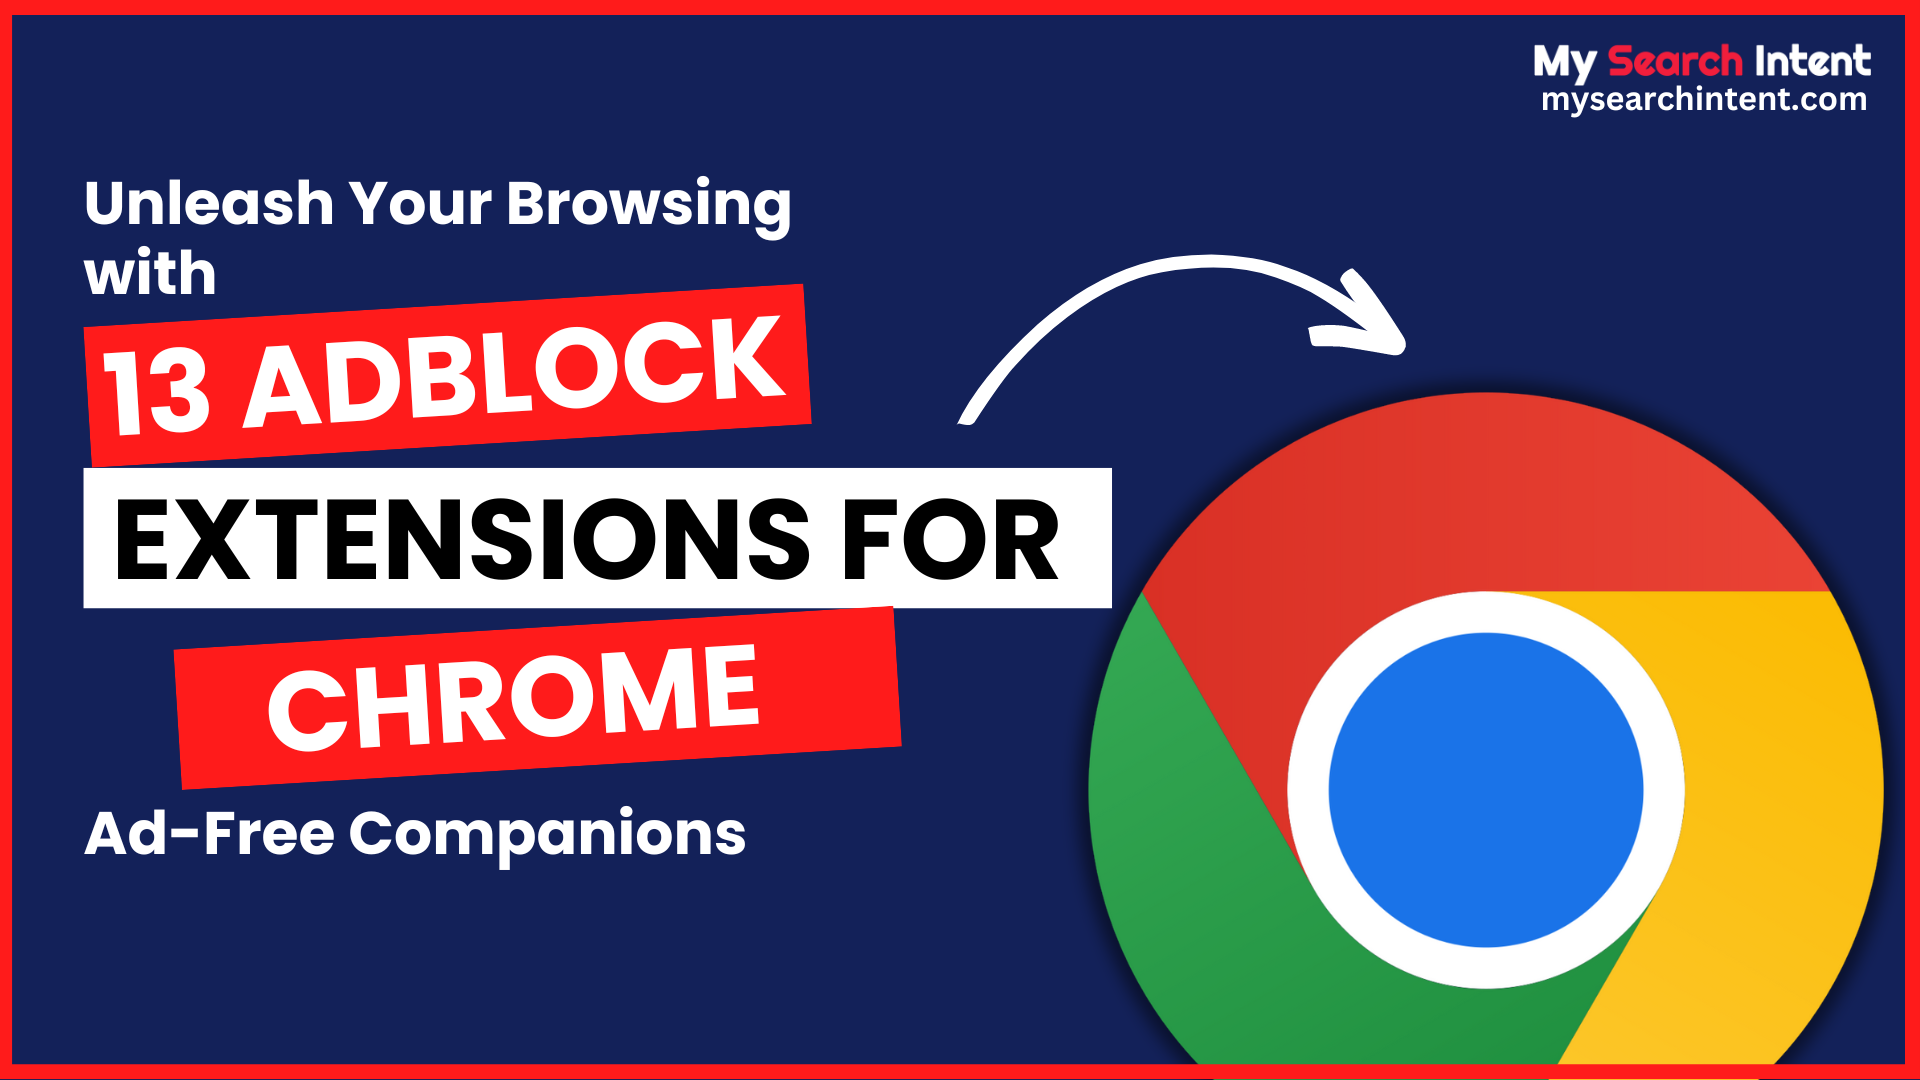 AdBlock Extensions for Chrome